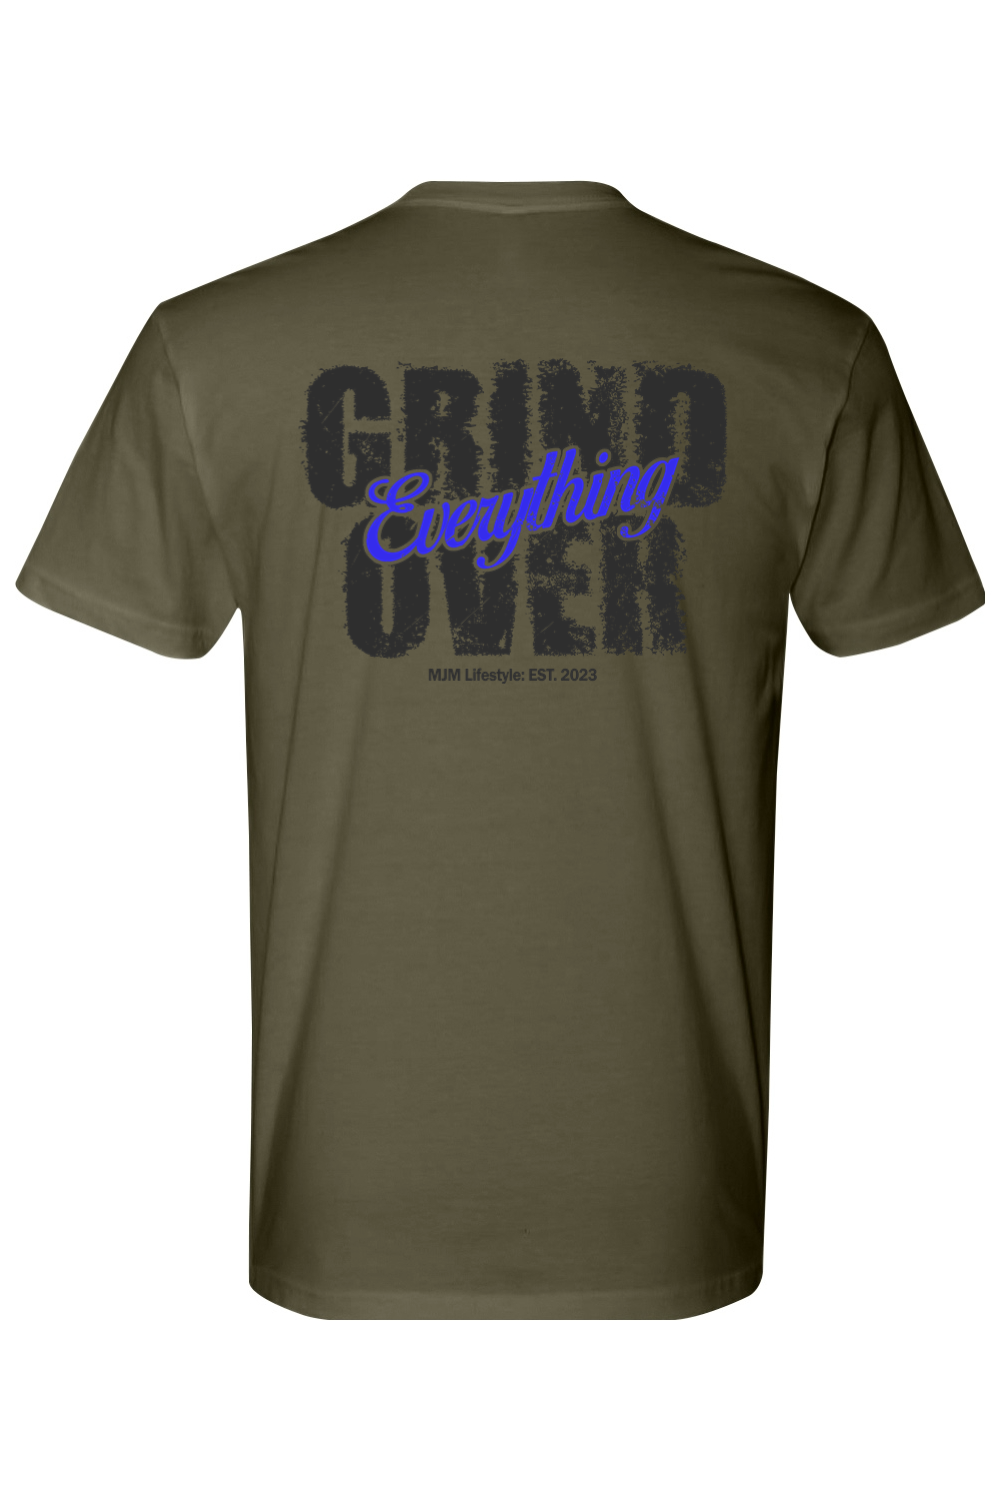 Grind Over Everything Tee